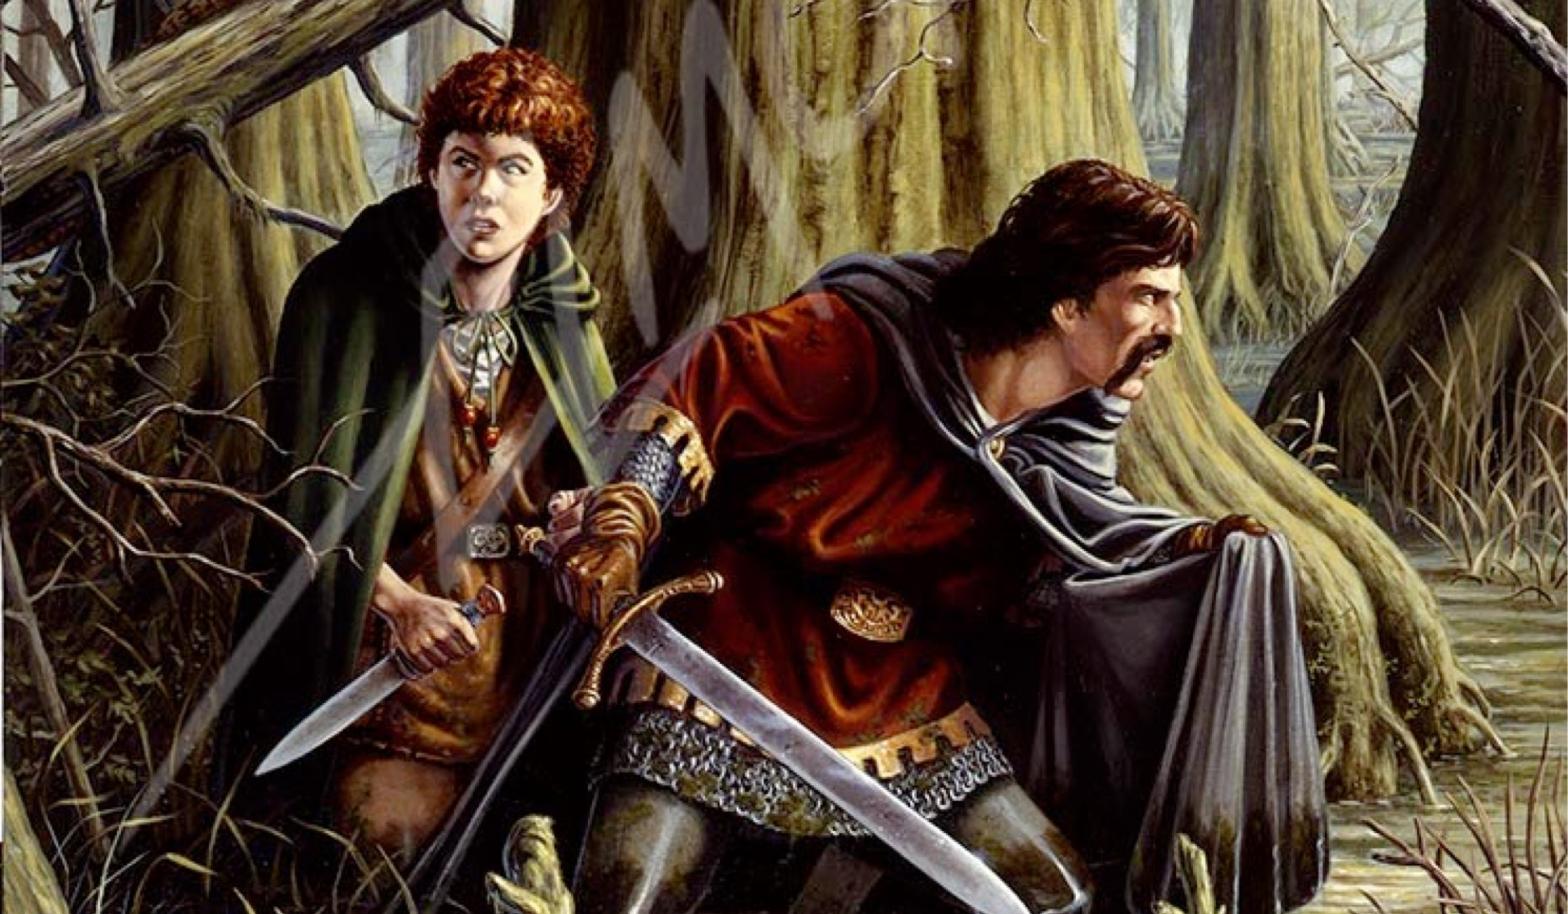 Inset of Larry Elmore's original cover for Weasel's Luck. (Image: Wizards of the Coast)